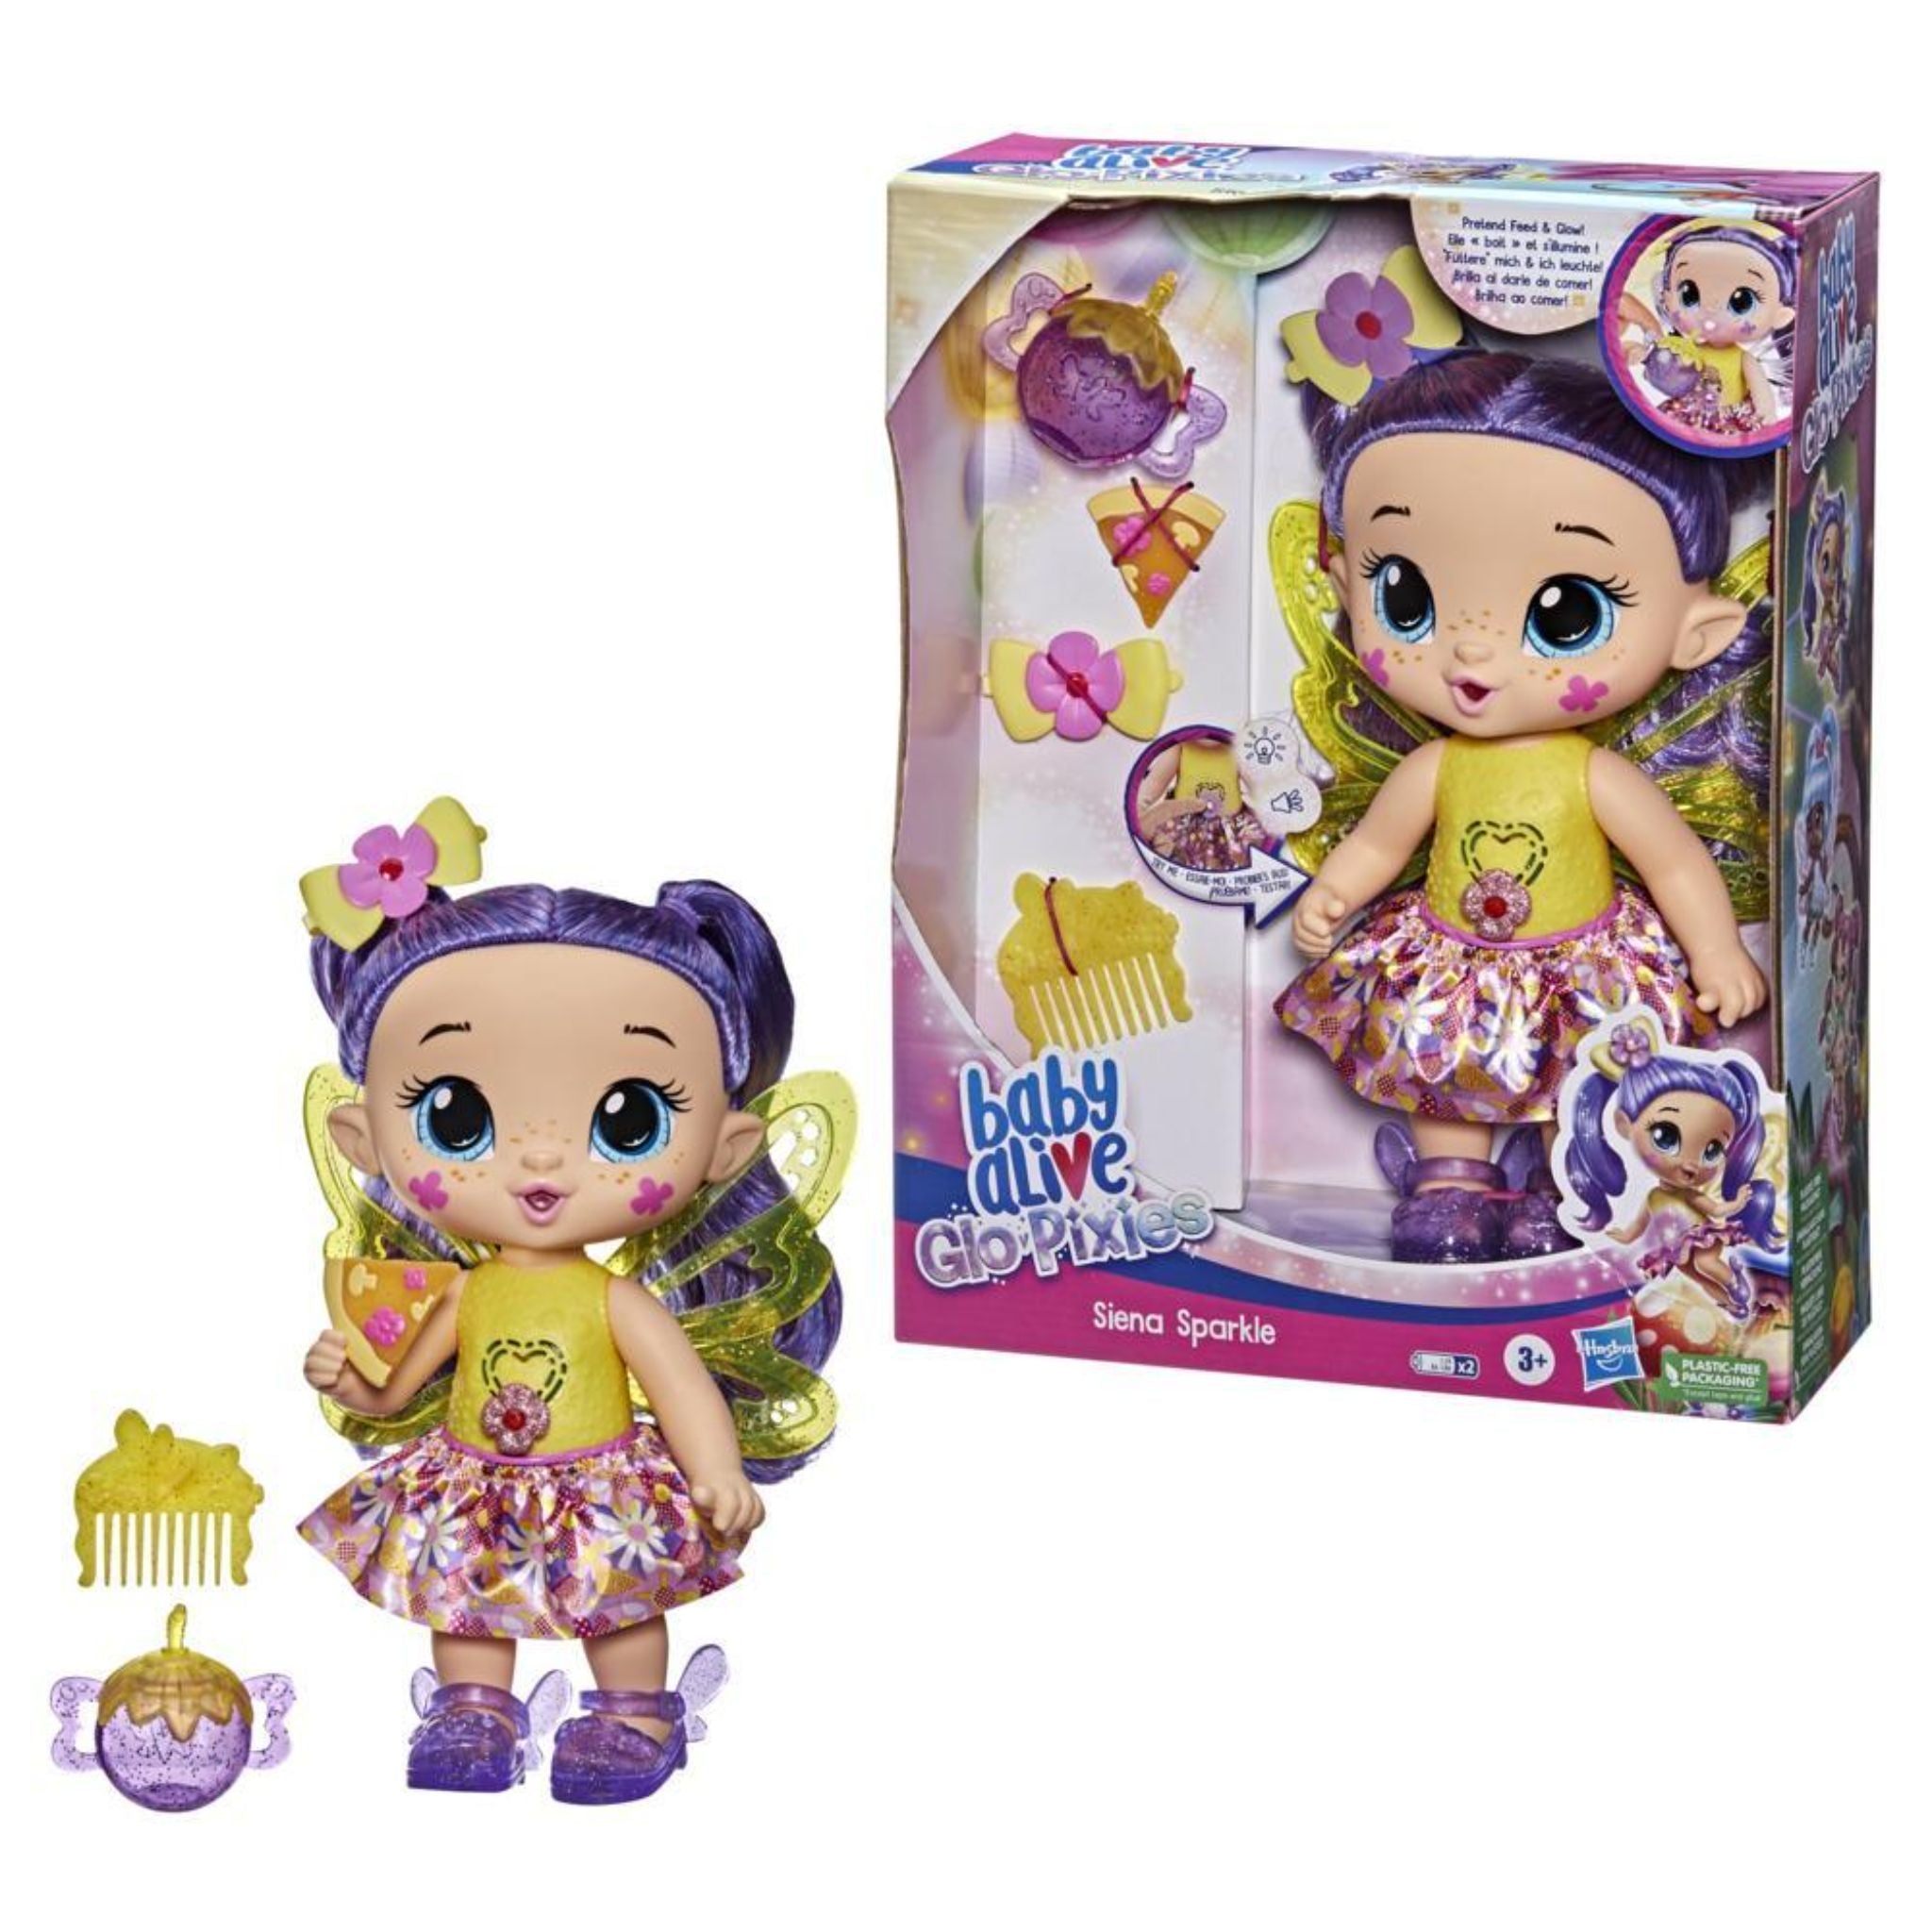 Baby Alive GloPixies Doll, Siena Sparkle, Glowing Pixie Toy for Kids Ages 3 and Up, Interactive 10.5-inch Doll